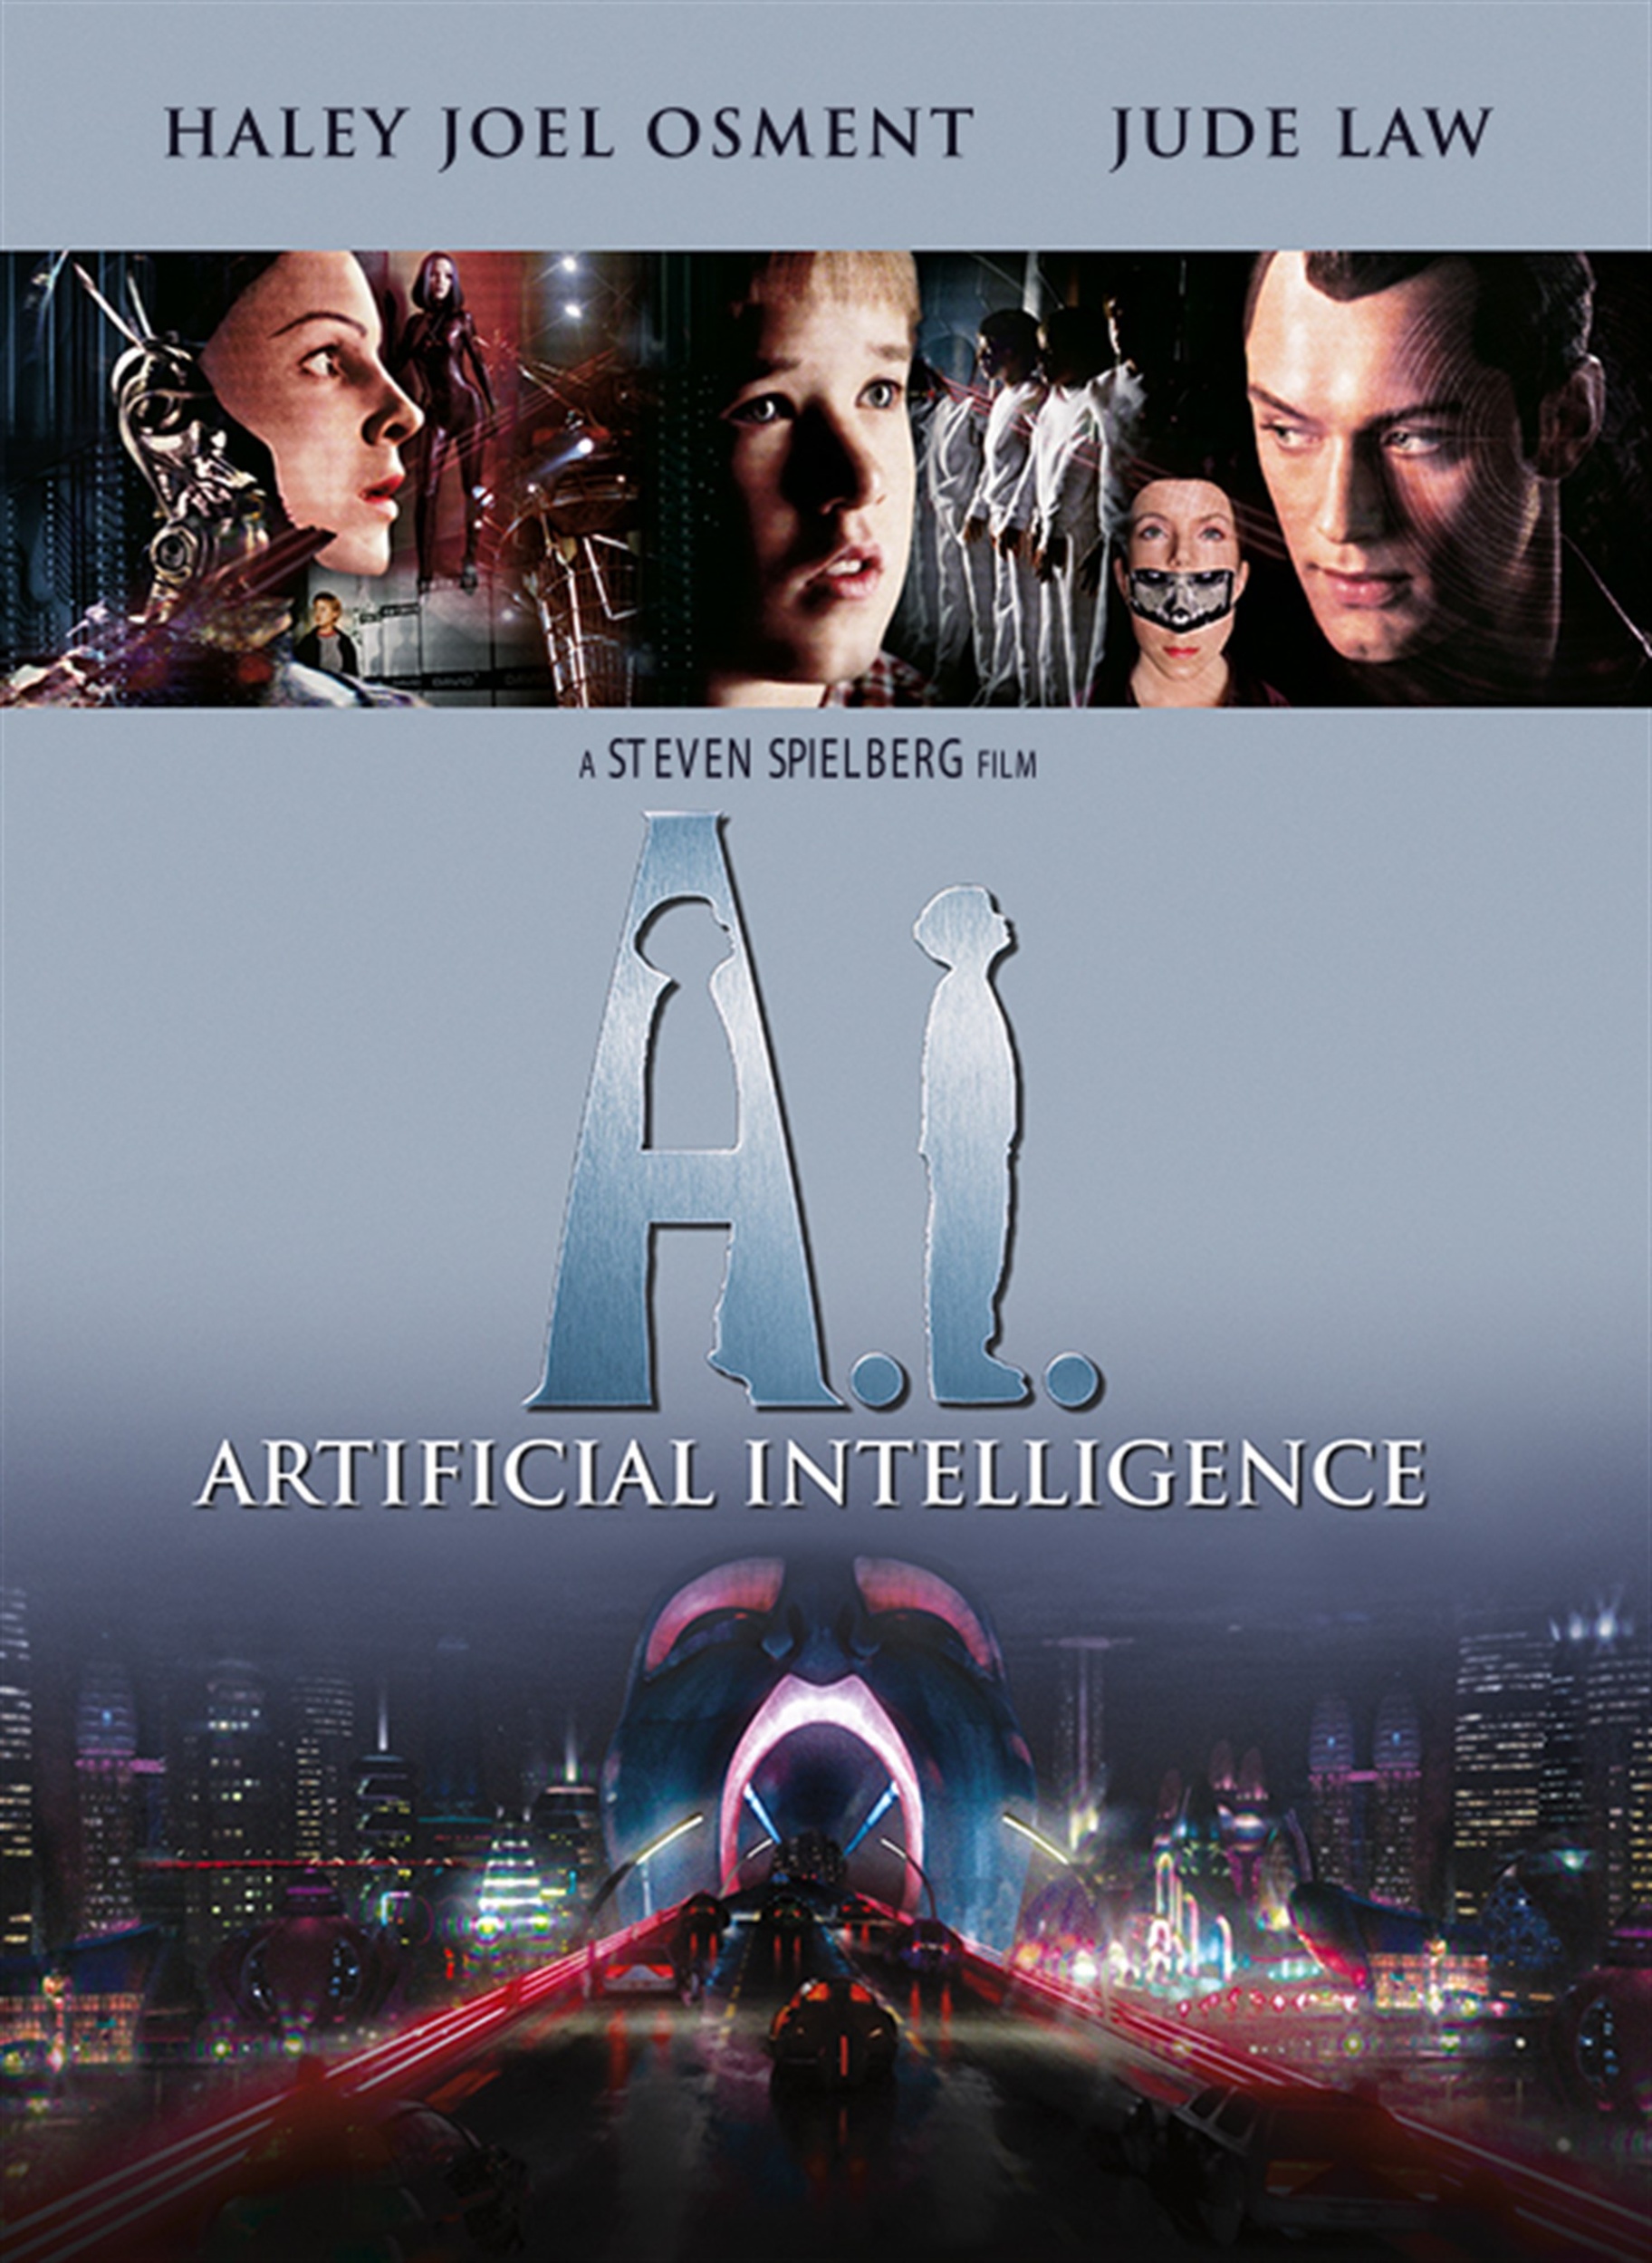 Get Ready For A Mind-blowing Ride With This AI Artificial Intelligence Movie!